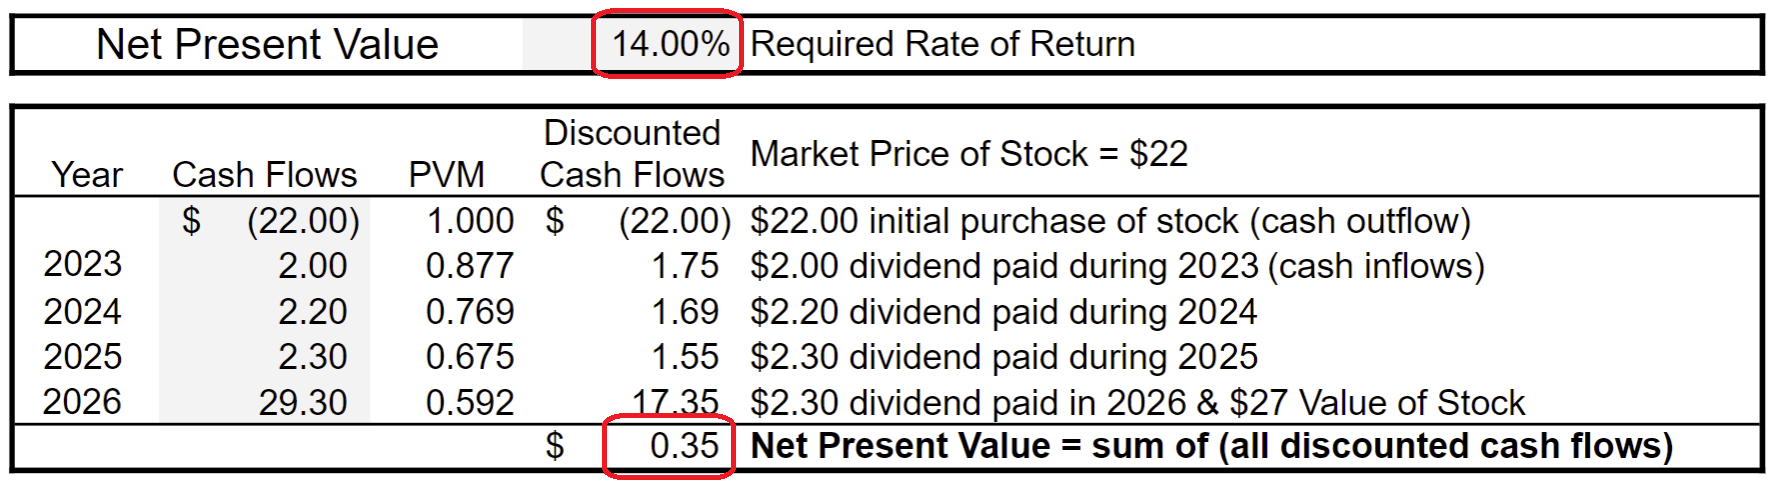 Aha, by using 14% for the Required Rate of Return, the Net Present Value is even closer to zero than the previous two examples. This is how we calculate Internal Rate of Return. We keep trying different Required Rates of Return until we converge upon the point where the Net Present Value is zero. That point is the Internal Rate of Return.